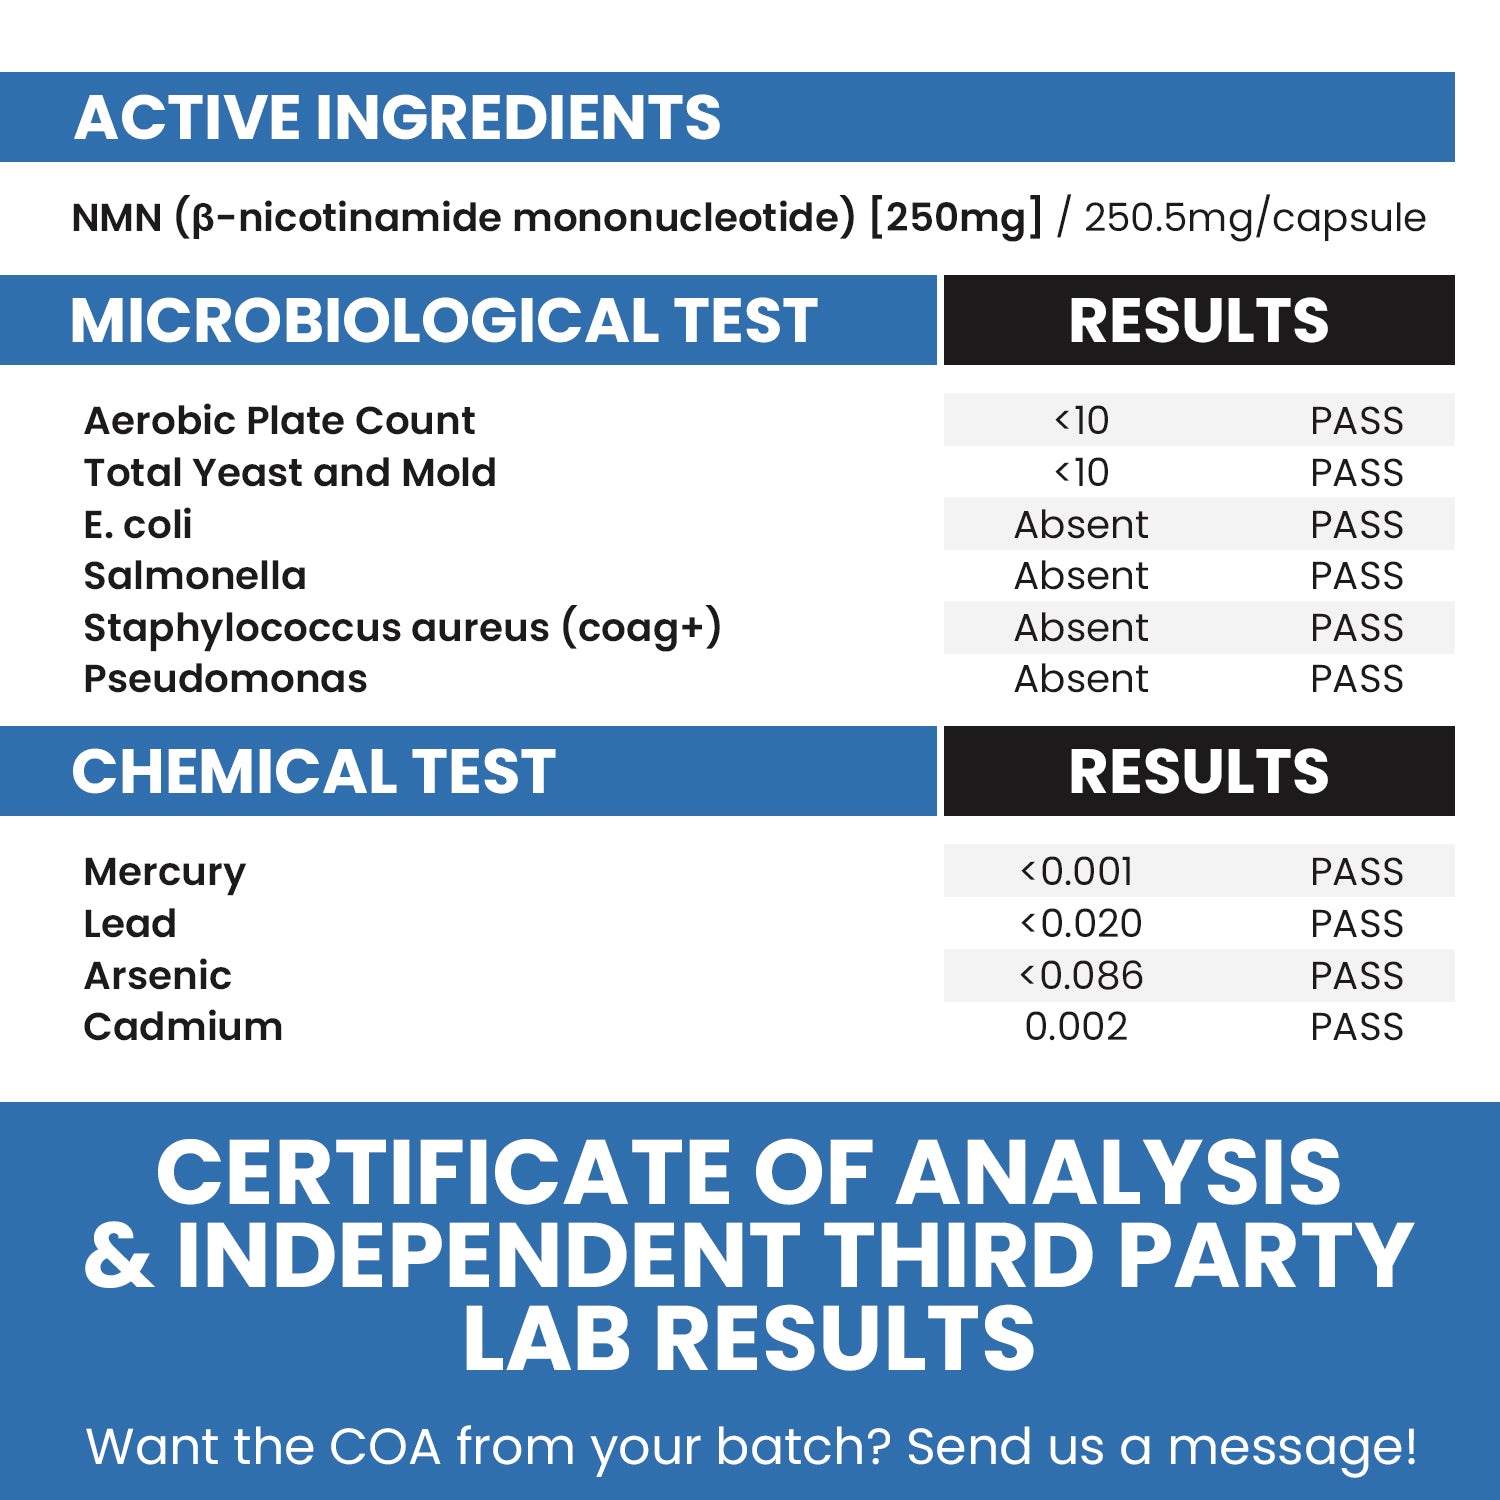 Genex Formulas certificate of analysis & independent third party lab results. Shows that Genex NMN supplement passed all third party lab testing a for Microbiological substances and harmful chemicals.  